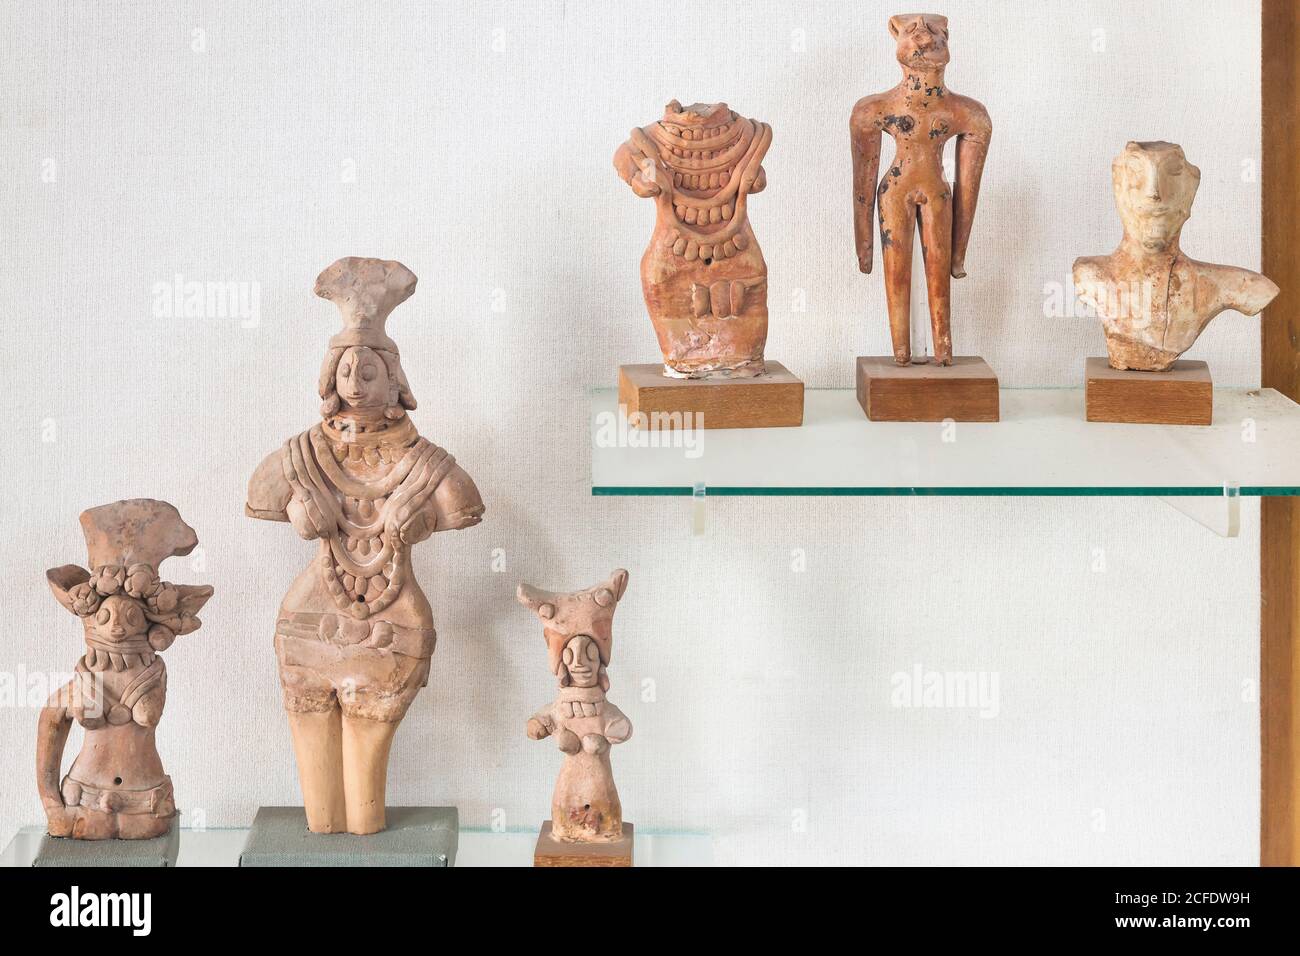 Display of ancient clay figurines, Indus valley civilization Gallery, National Museum of Pakistan, Karachi, Sindh, Pakistan, South Asia, Asia Stock Photo